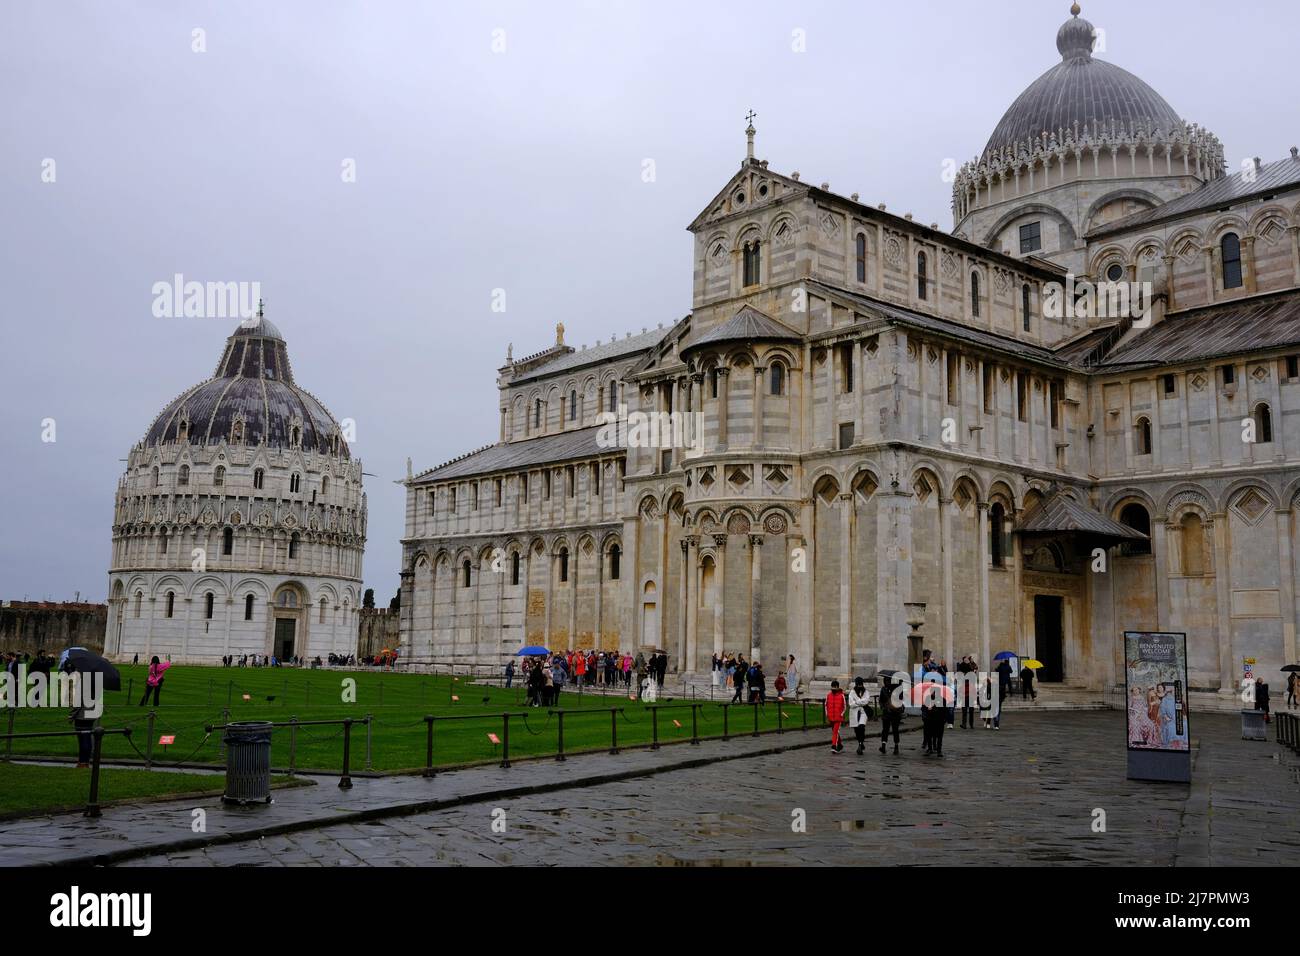 Visiting the Piazza dei Miracoli in Pisa, Italy on a cloudy day Stock Photo